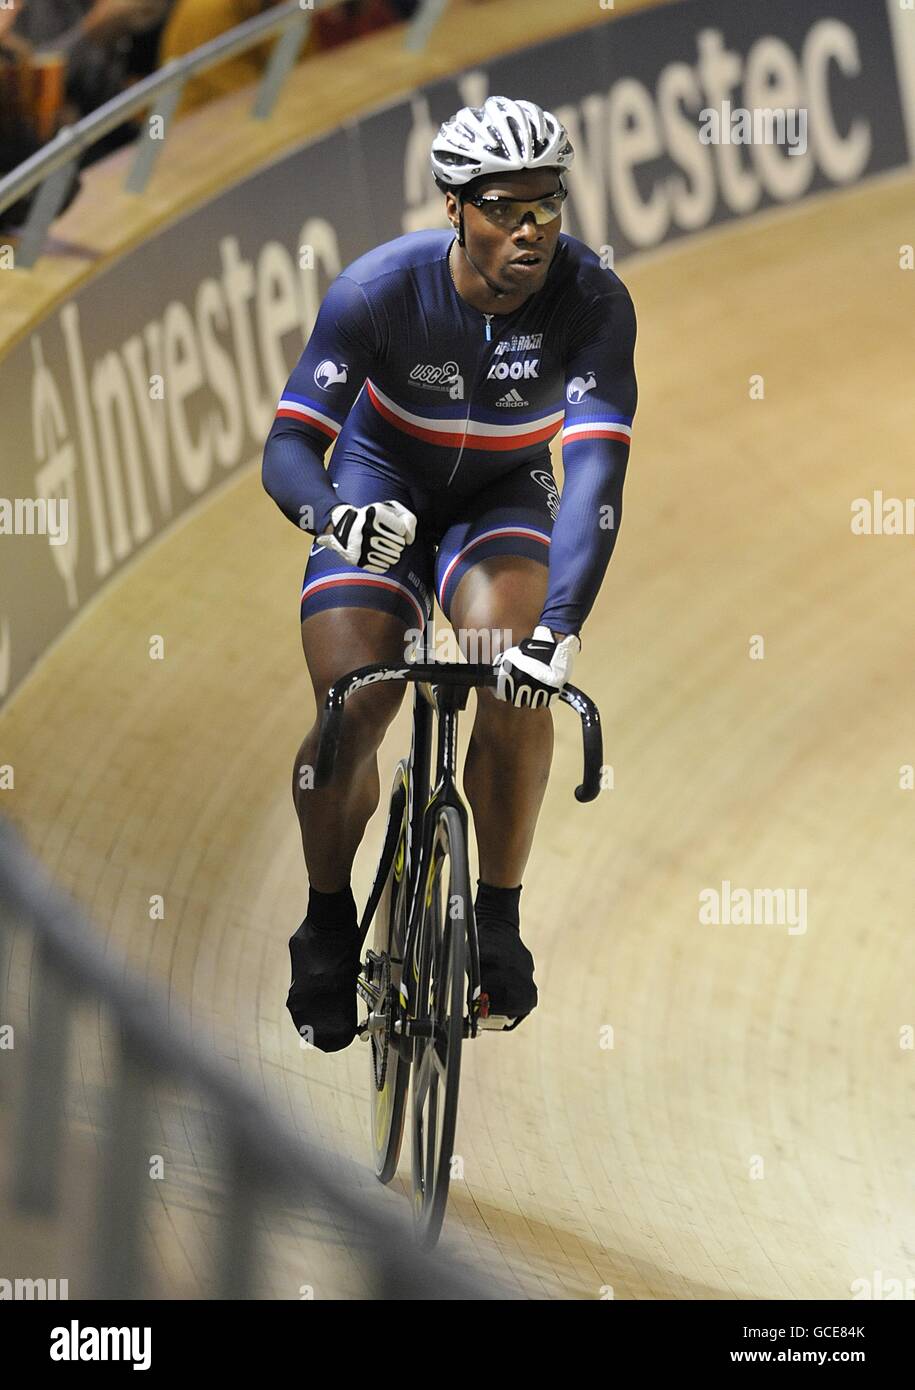 France's Gregory Bauge in action in the Men's Sprint during day four of the Track Cycling World Championships at the Ballerup Arena Stock Photo